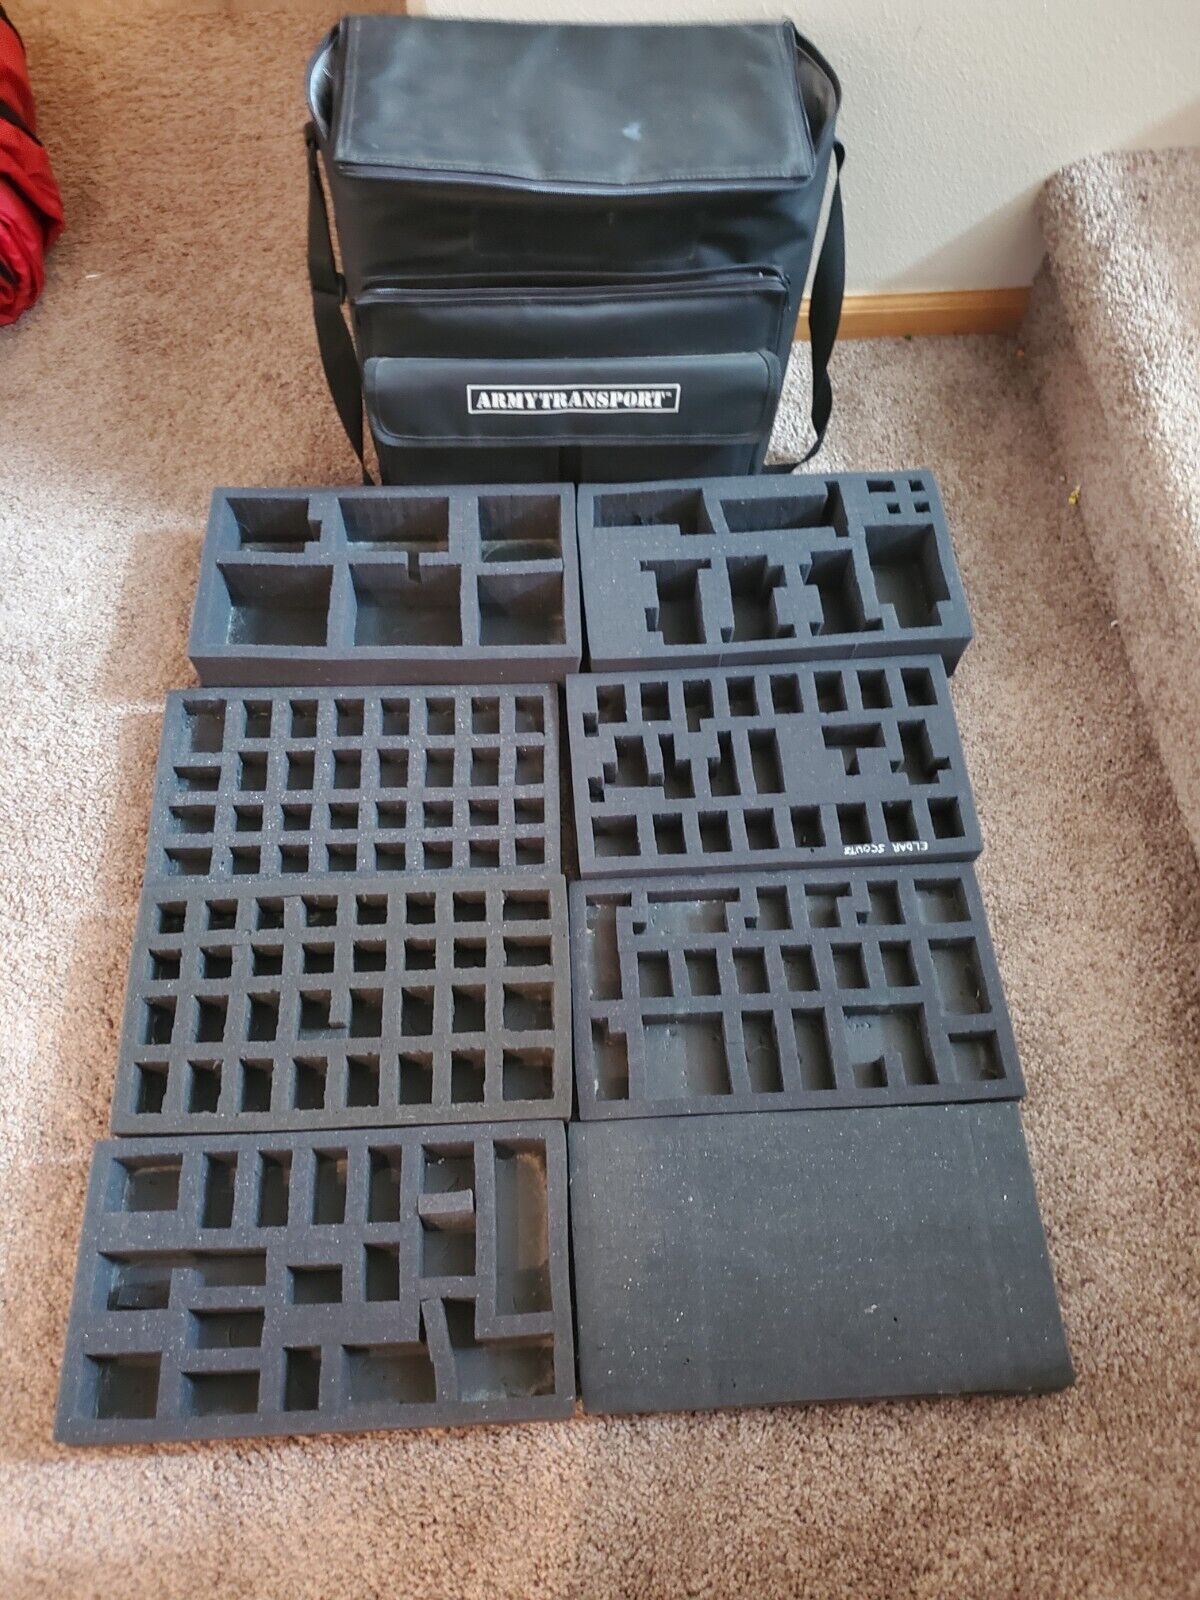 Warhammer Figures / Miniatures Case Army Transport Bag With 8 Foam Inserts Used